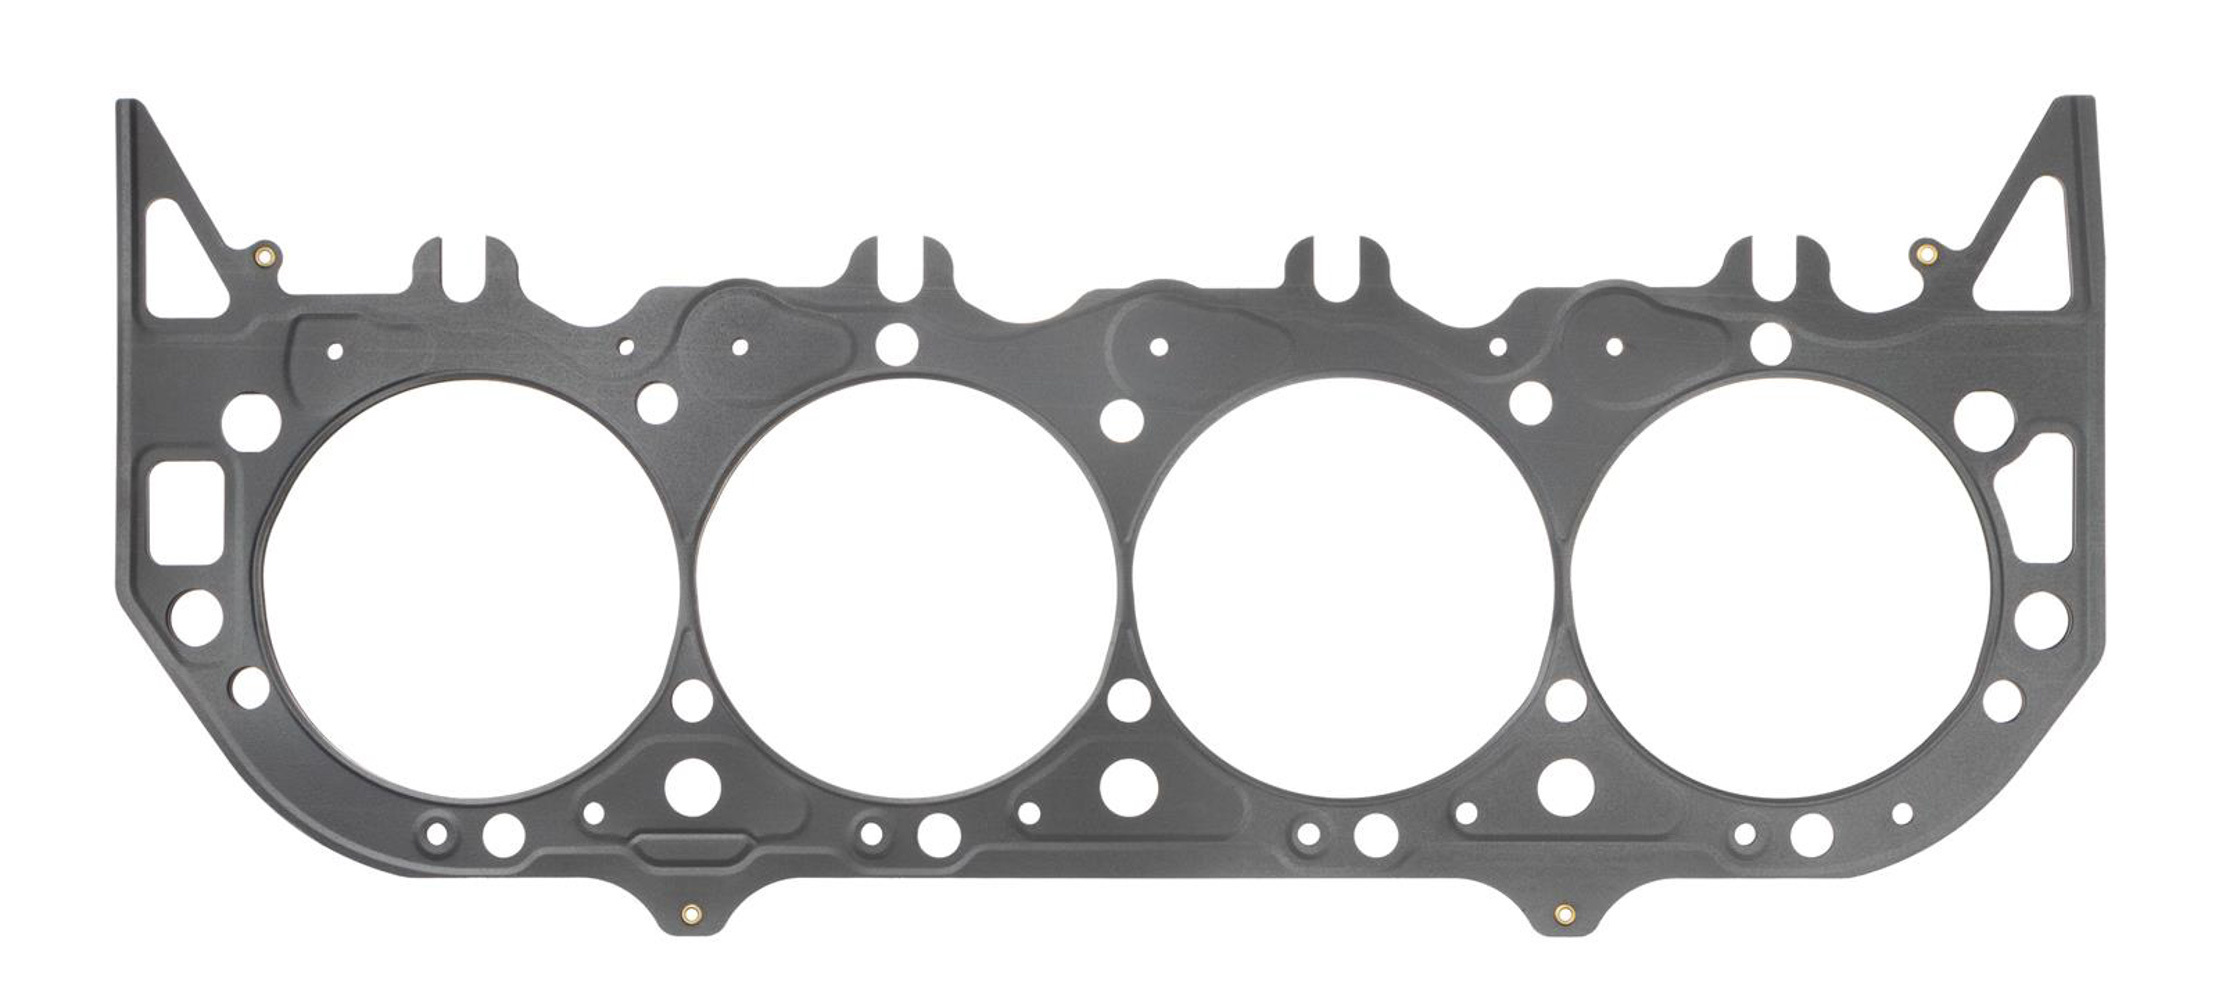 SCE Gaskets M136359 - Cylinder Head Gasket, MLS Spartan, 4.630 in Bore, 0.059 in Compression Thickness, Multi-Layer Steel, Big Block Chevy, Each